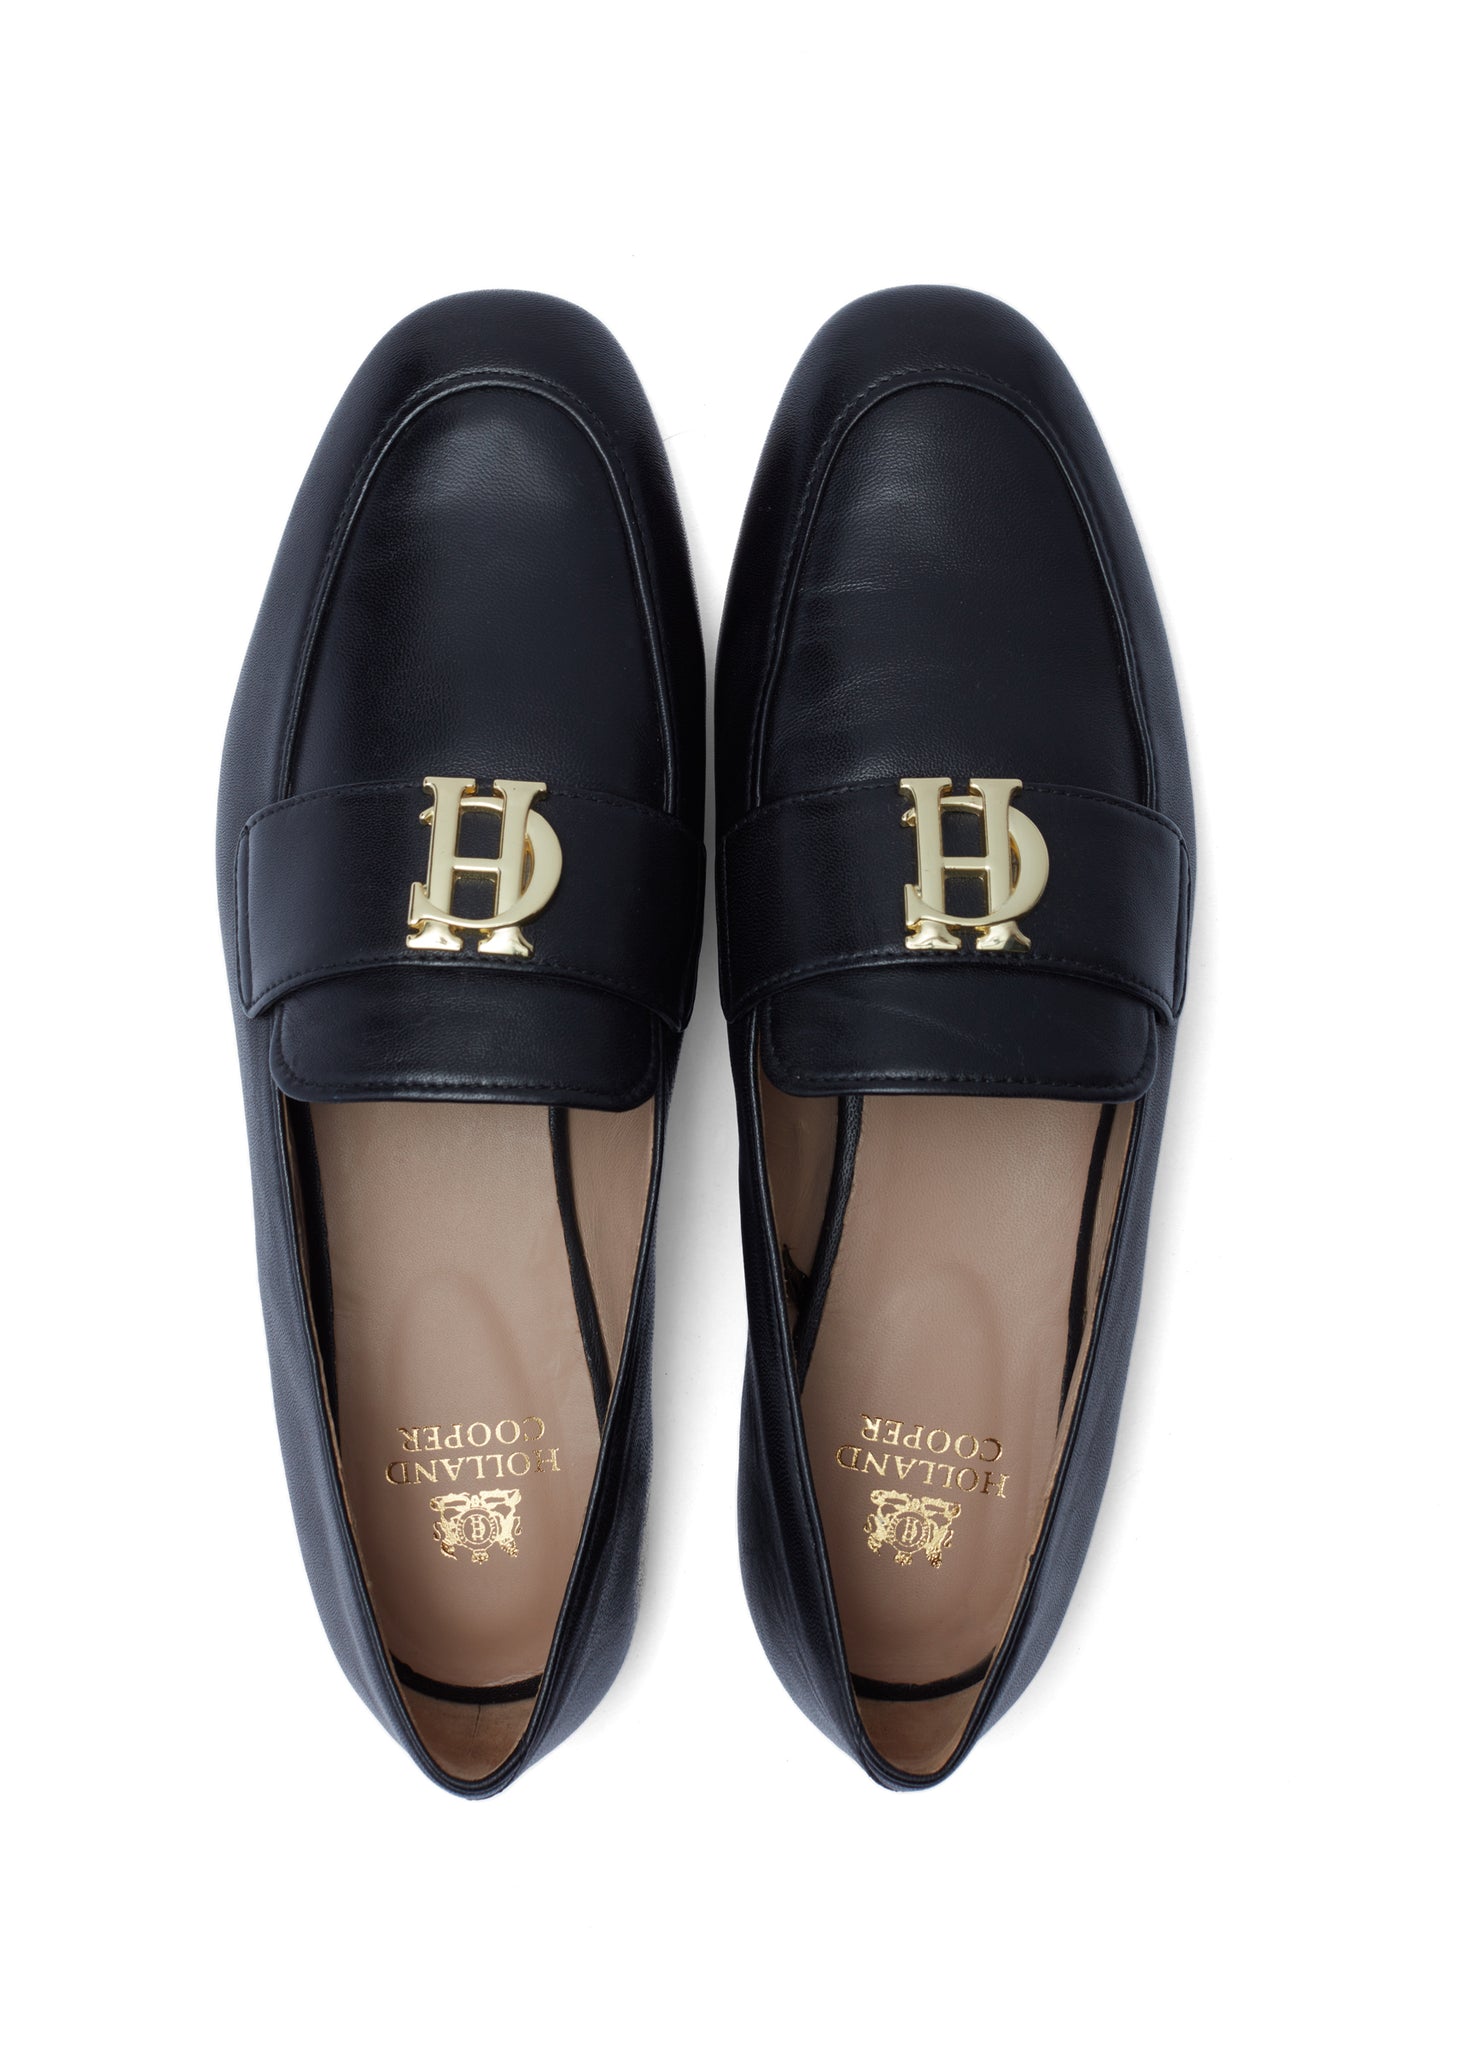 birds eye view of black leather loafers with a slightly pointed toe and gold hardware to the top and gold foil branding to the inner sole